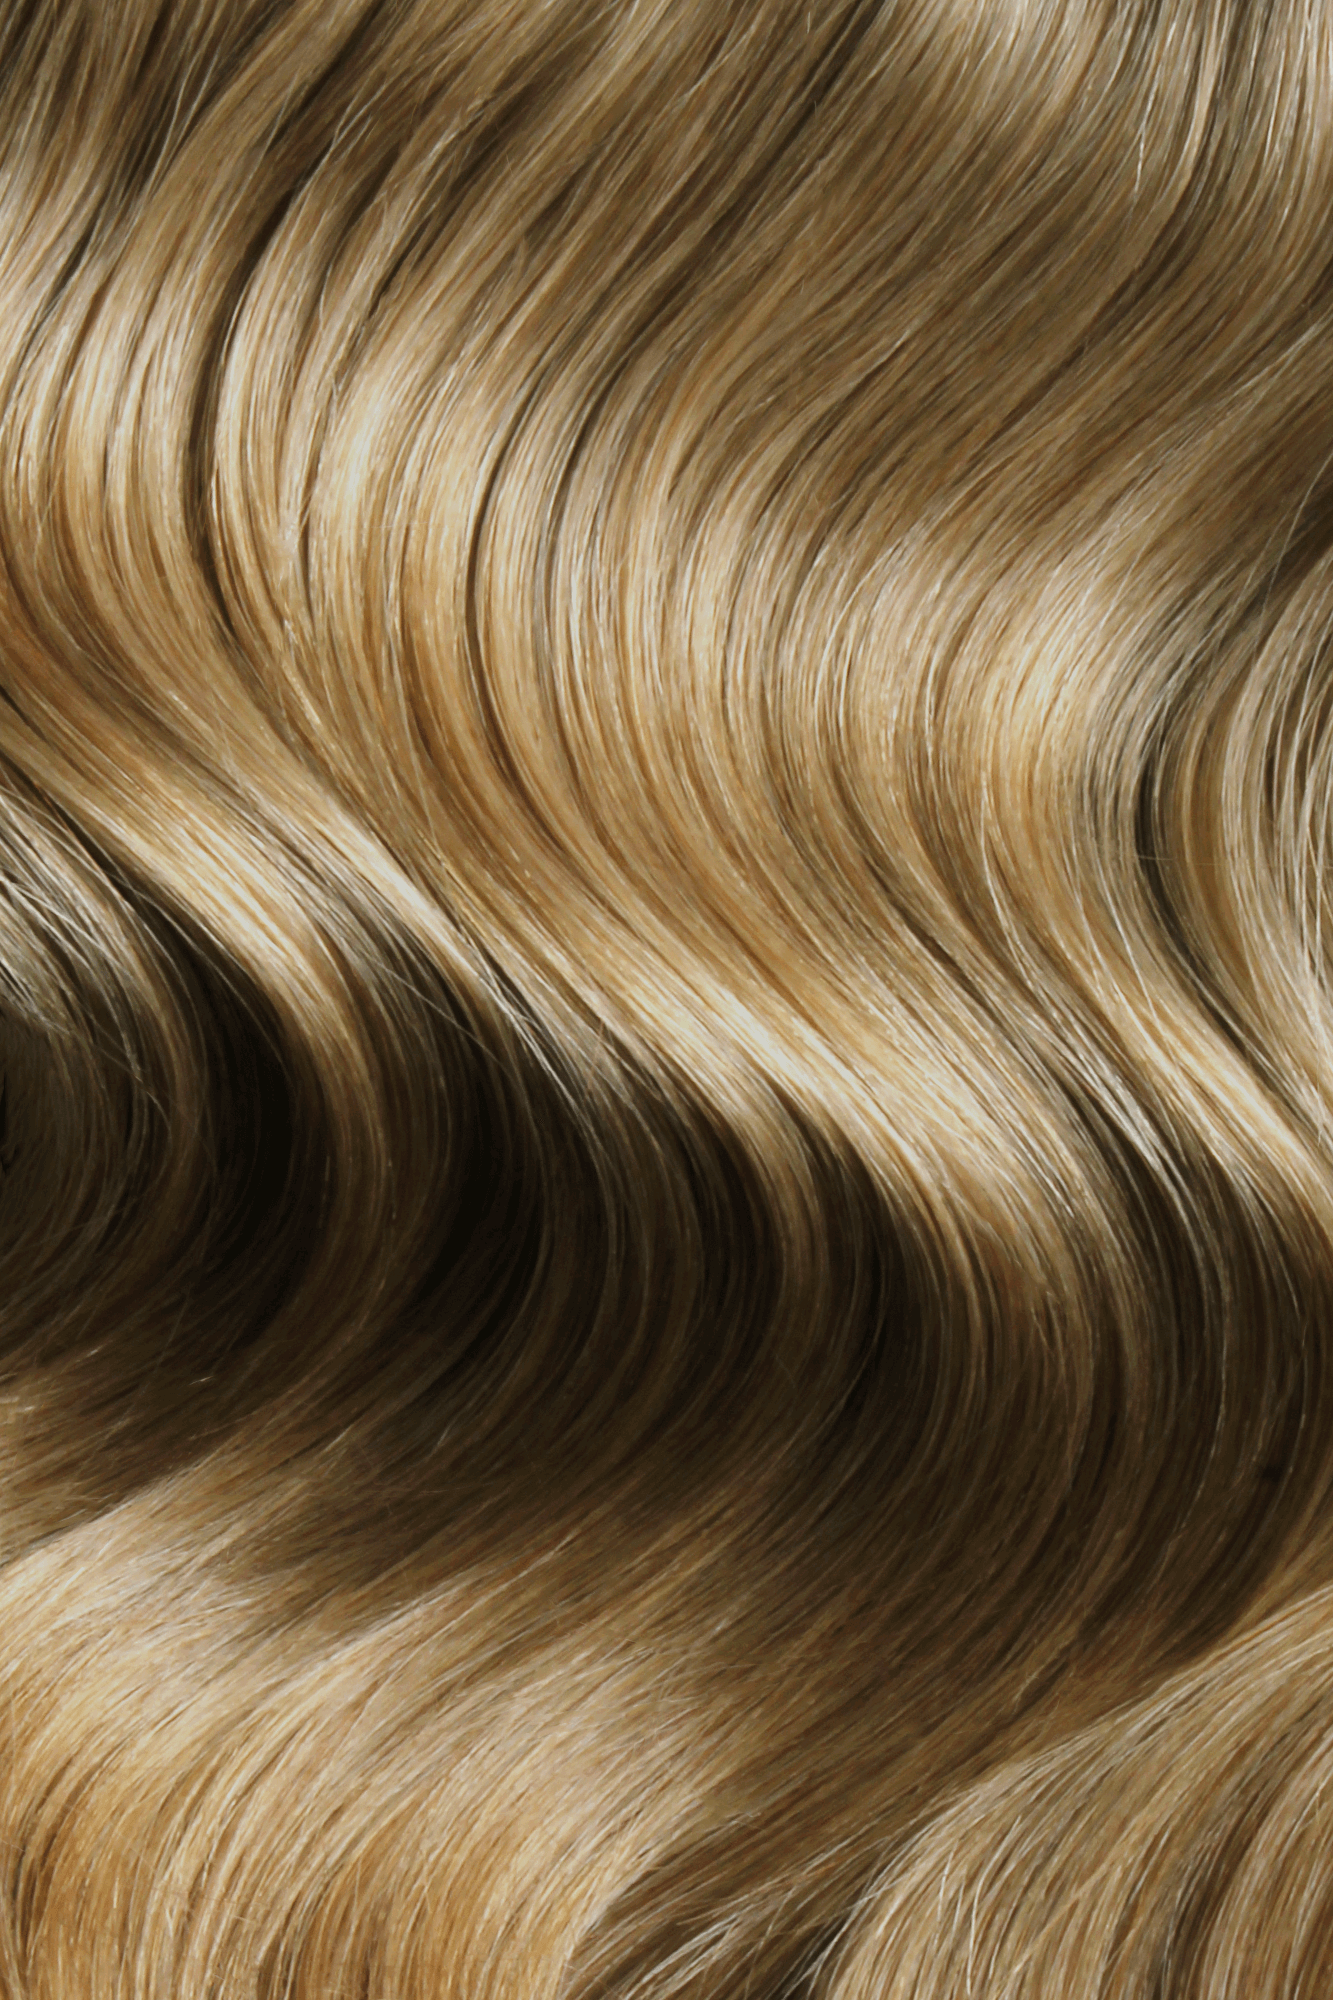 SEAMLESS® Tapes 20 Inches - SWAY Hair Extensions Mocha-8 clip-in hair extensions made of 100% Double Drawn, Remy Human Hair. SWAY SEAMLESS® Tapes, 20 inches. Lightweight, flexible, and perfect for any hairstyle.